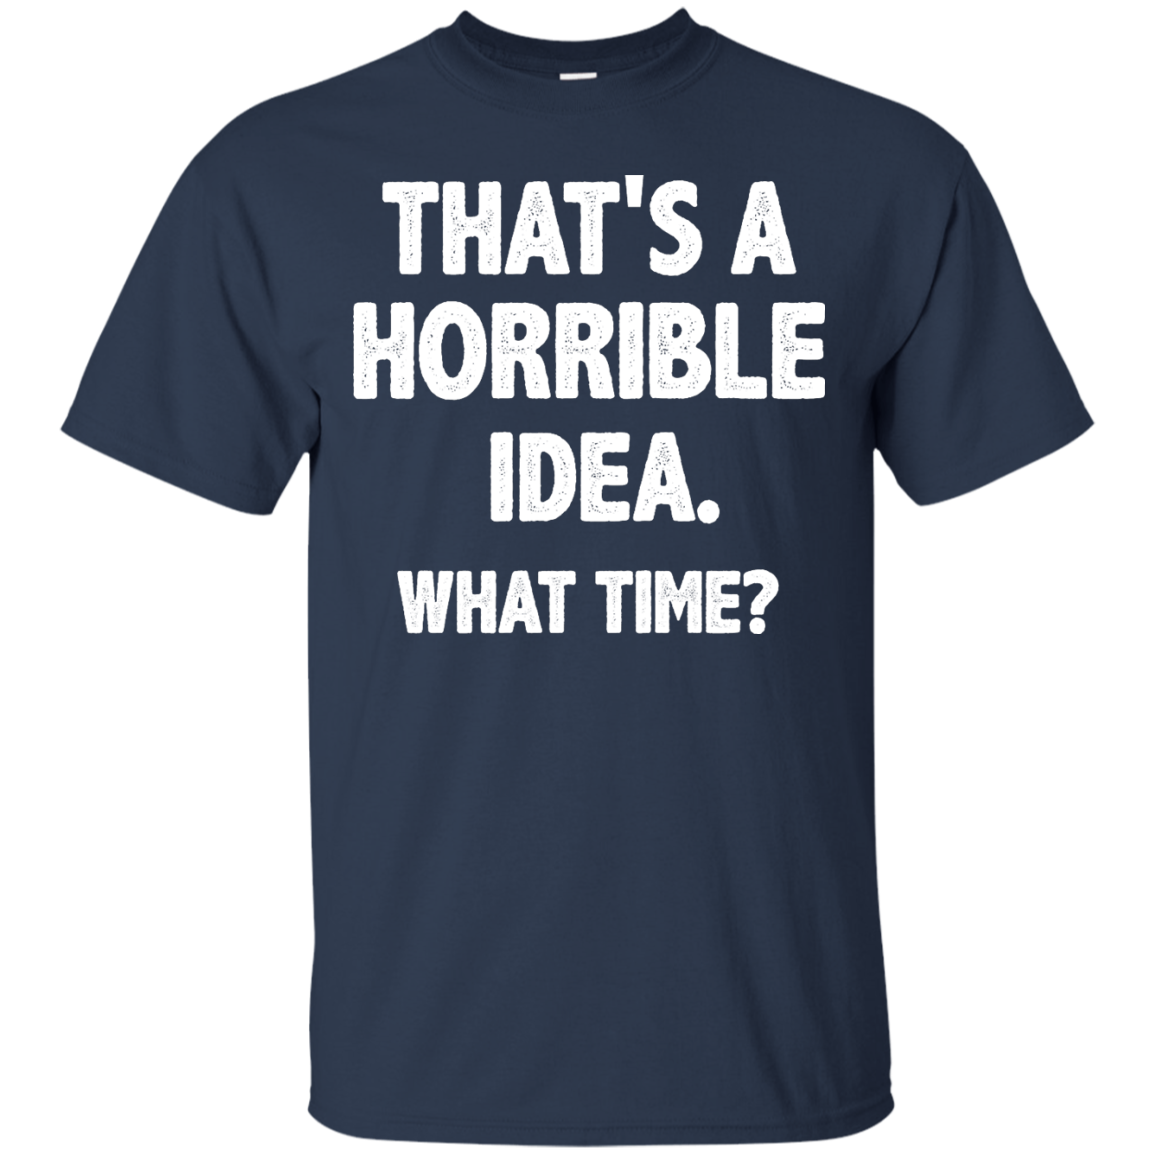 Awesome Tees: Funny - That is a horrible idea - What time T-shirt,Tank ...